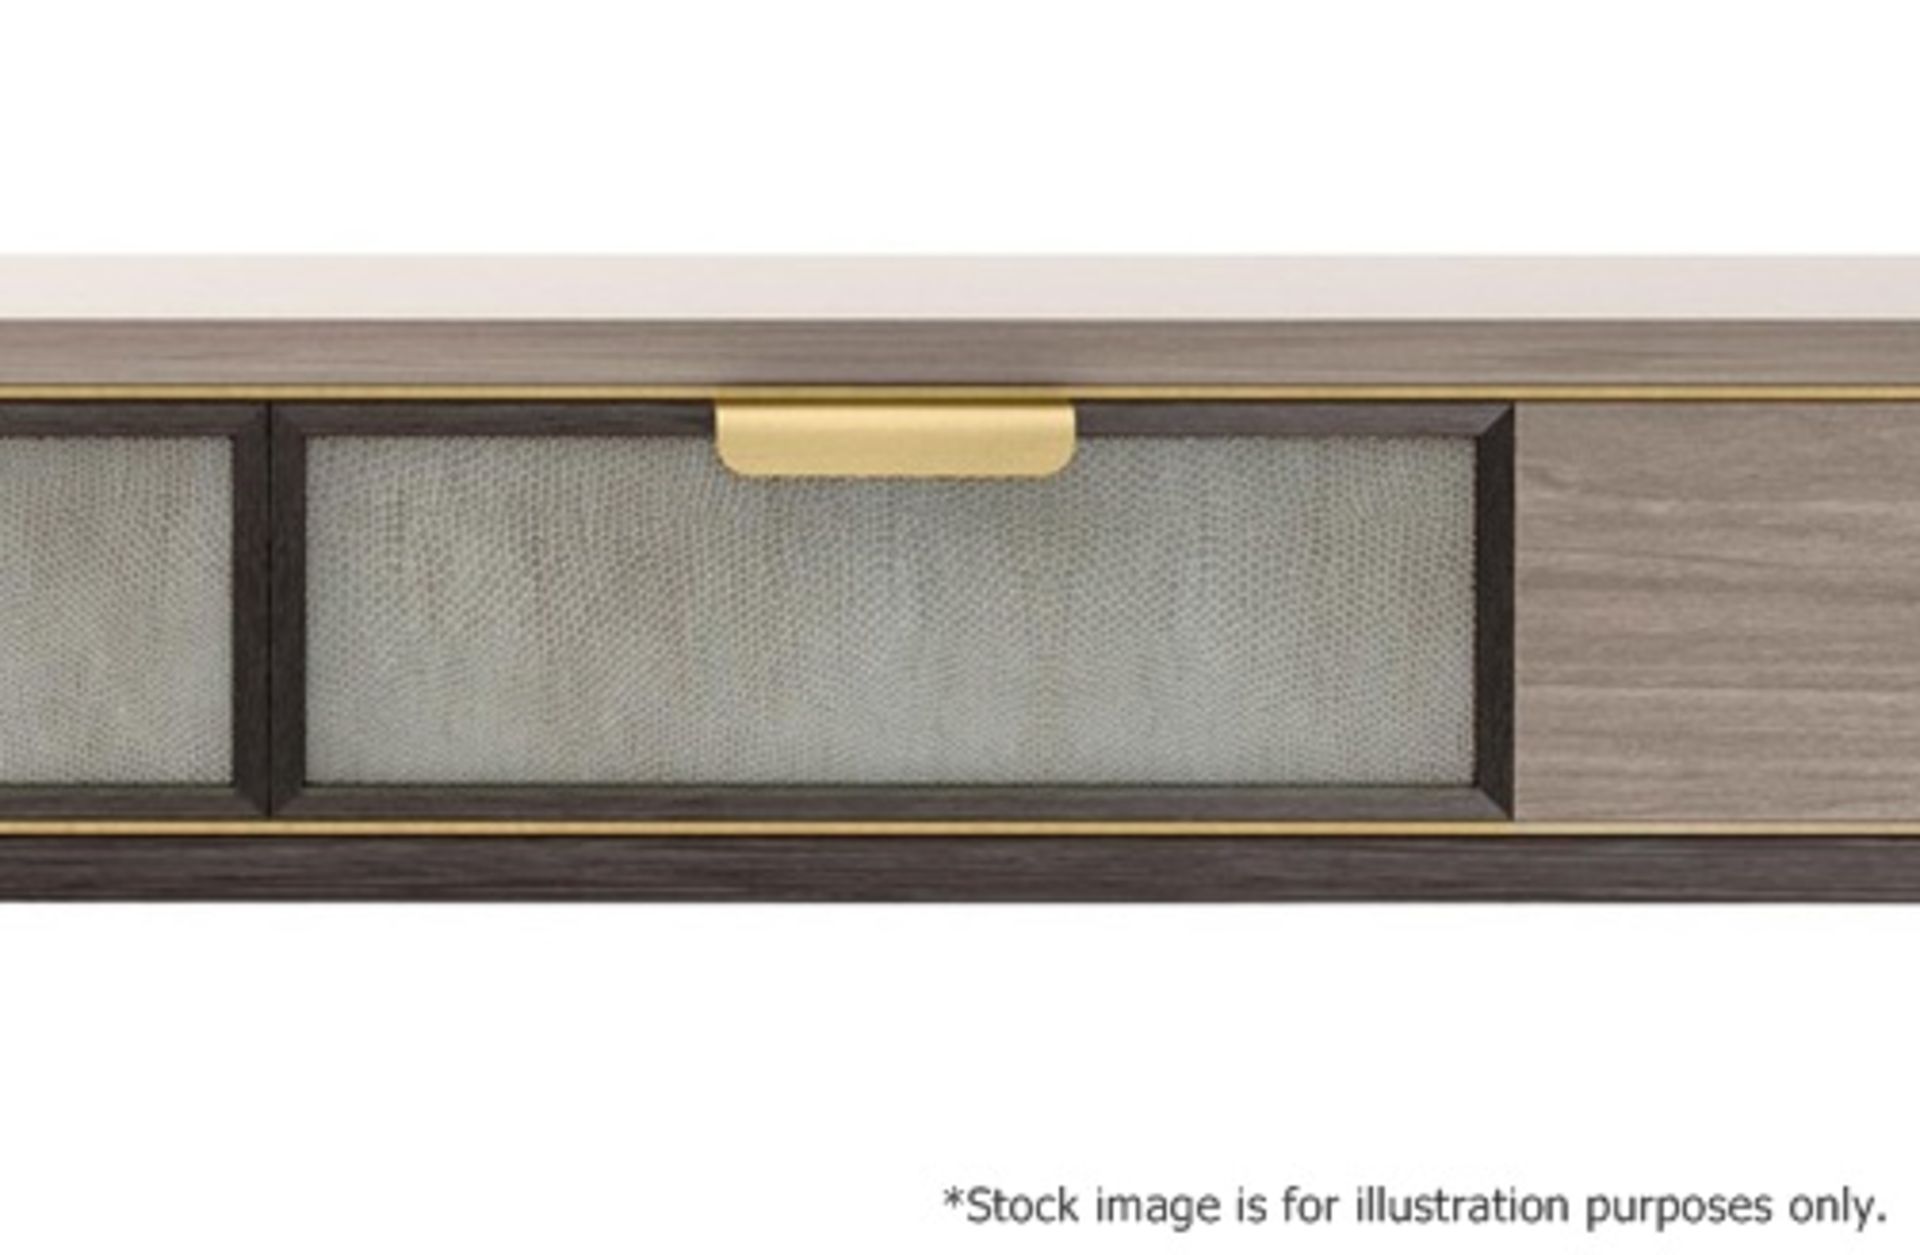 1 x FRATO 'Mandalay' Luxury Designer 2-Drawer Dresser Dressing Table In Brown With A High Gloss Dark - Image 4 of 15